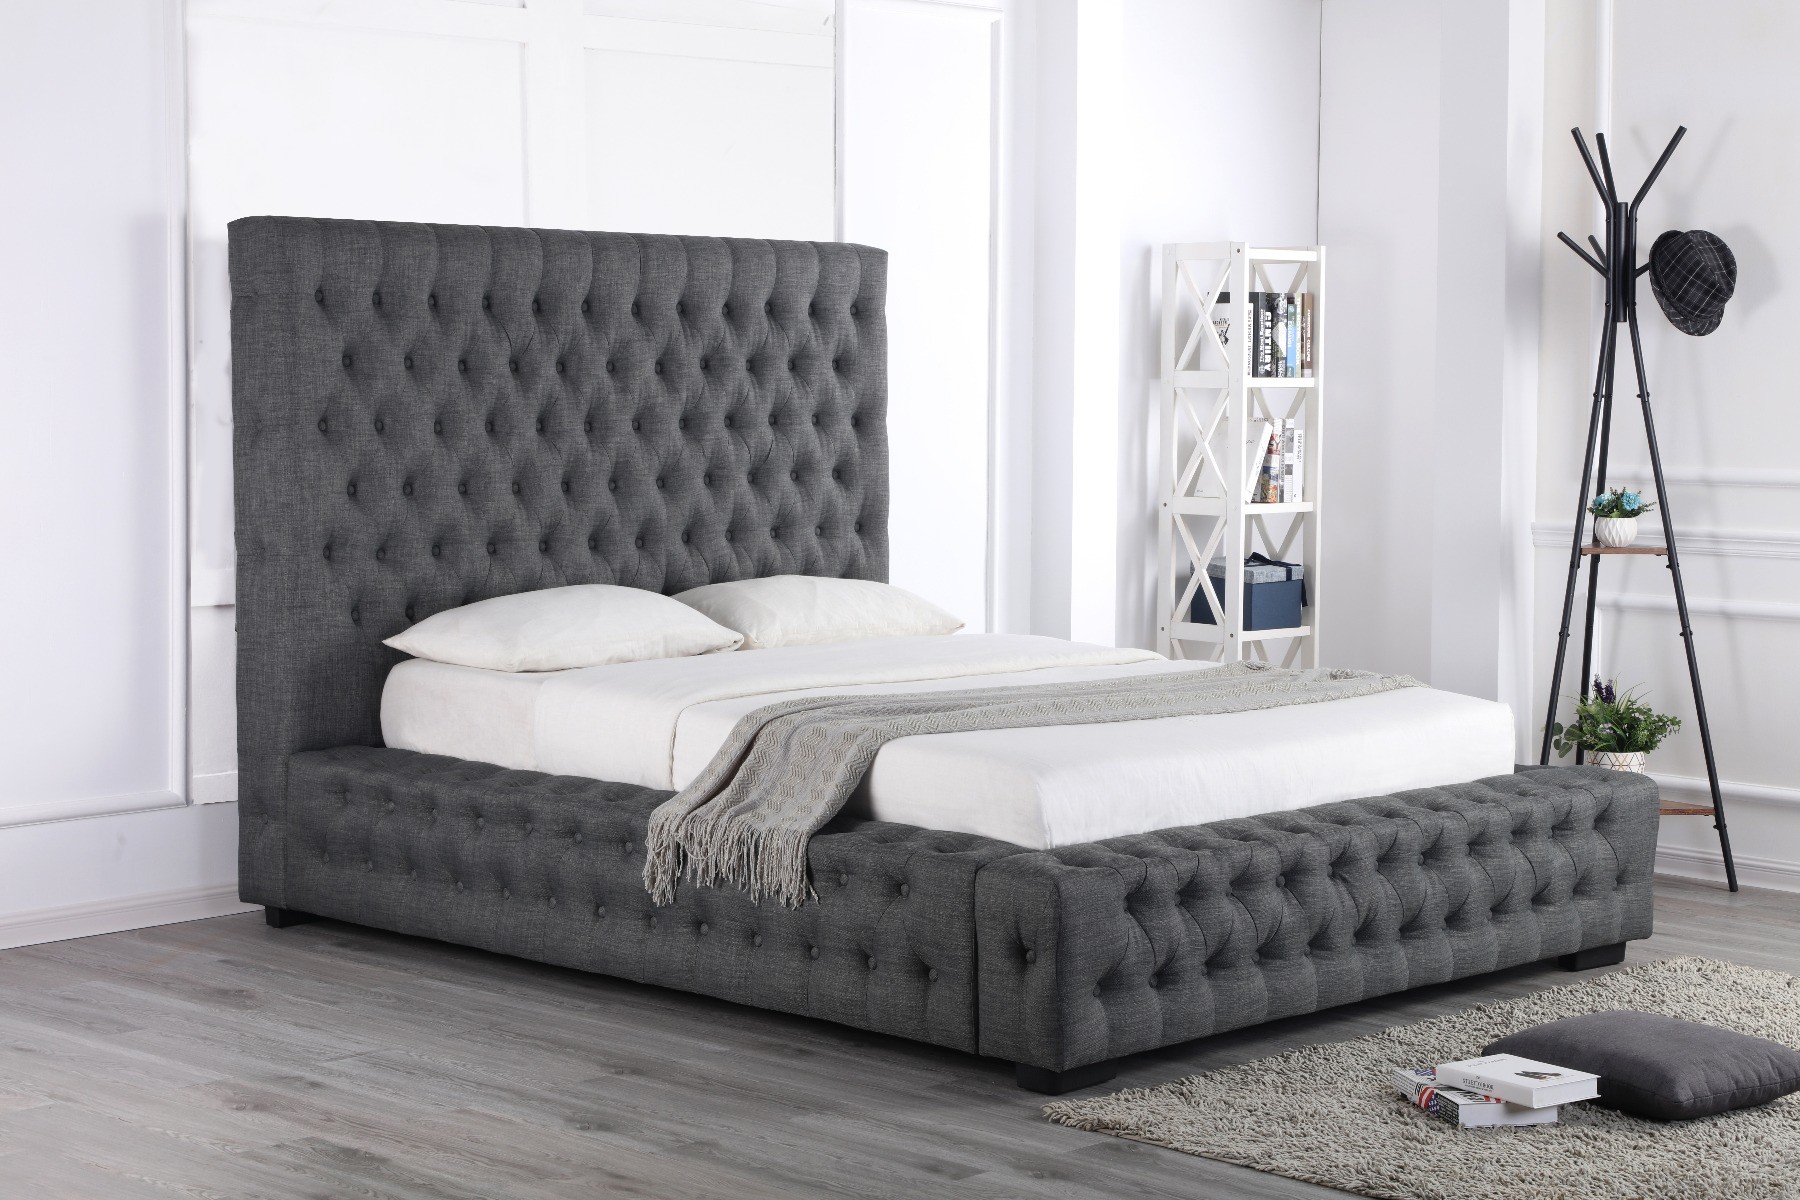 Stamford Grey Fabric Ottoman Super King, Cool Super King Size Beds